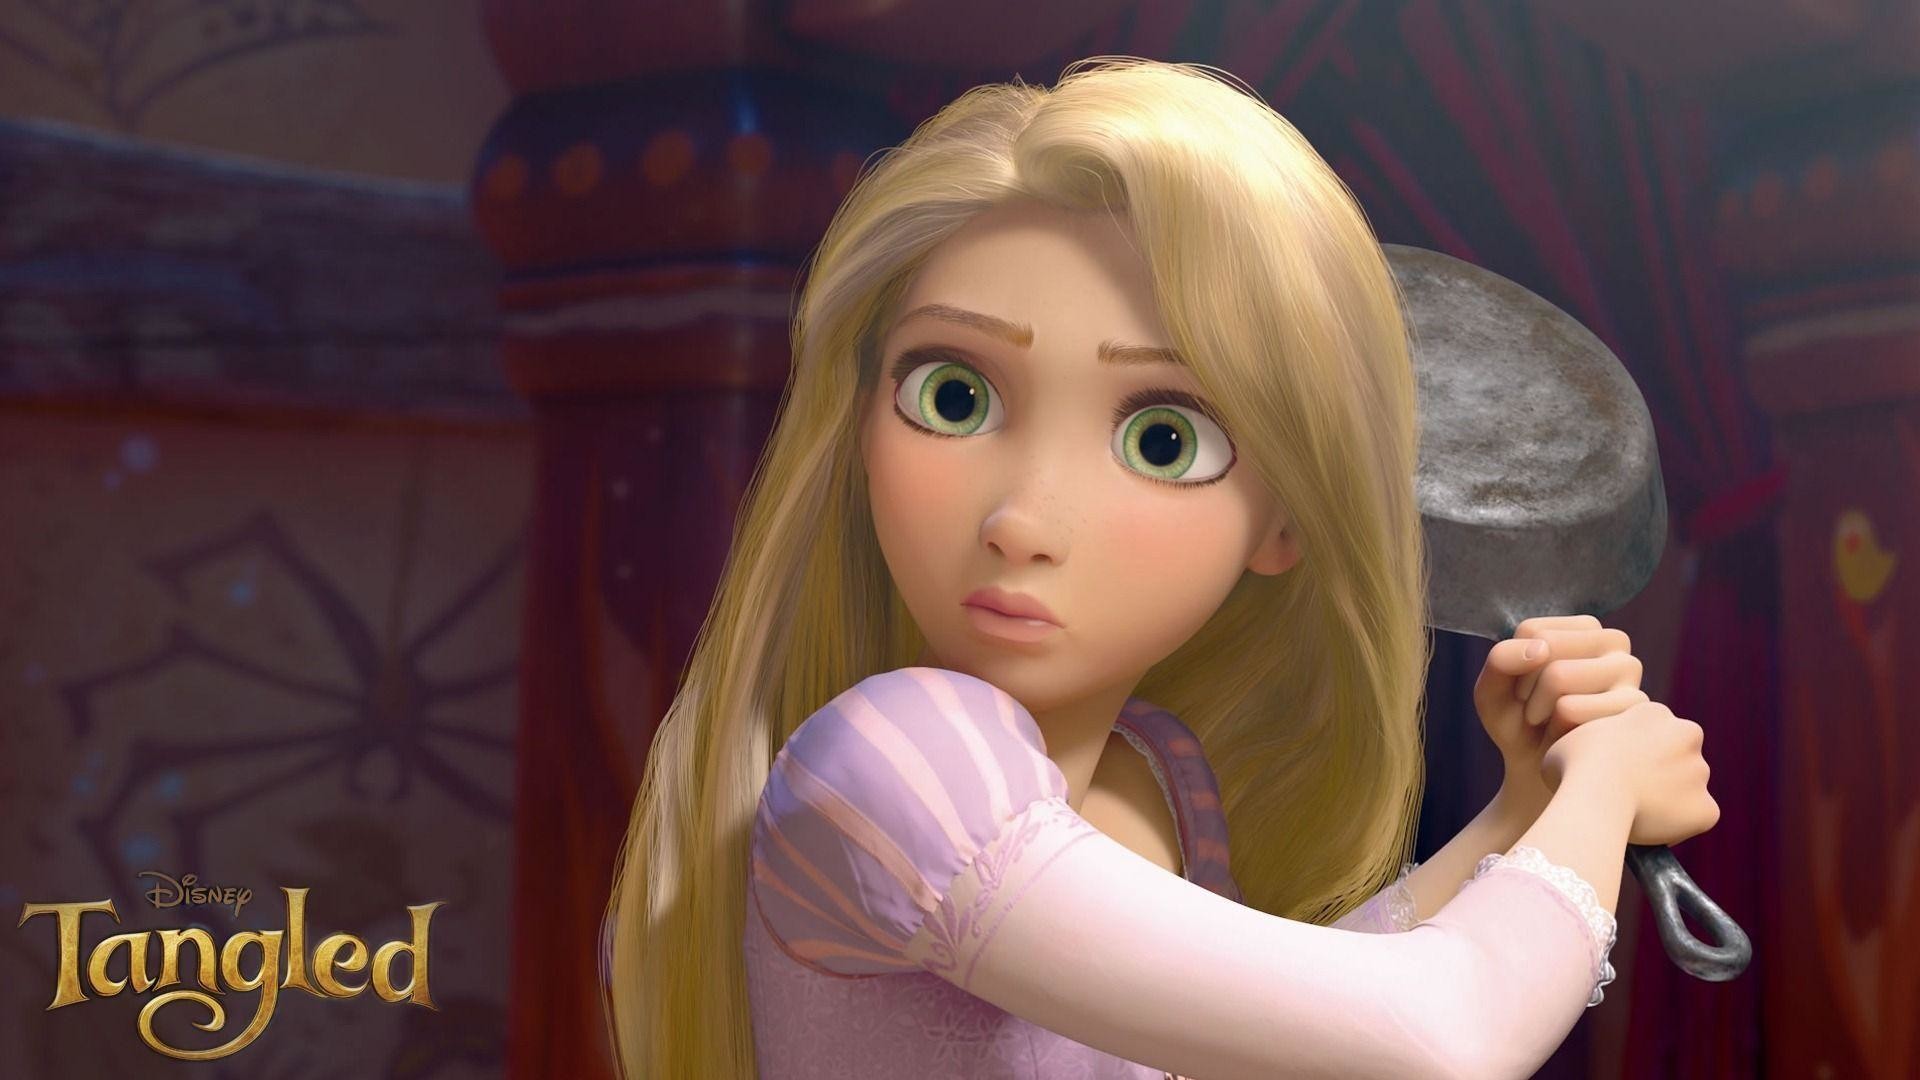 1920x1080 Tangled Wallpapers | HD Wallpapers Base